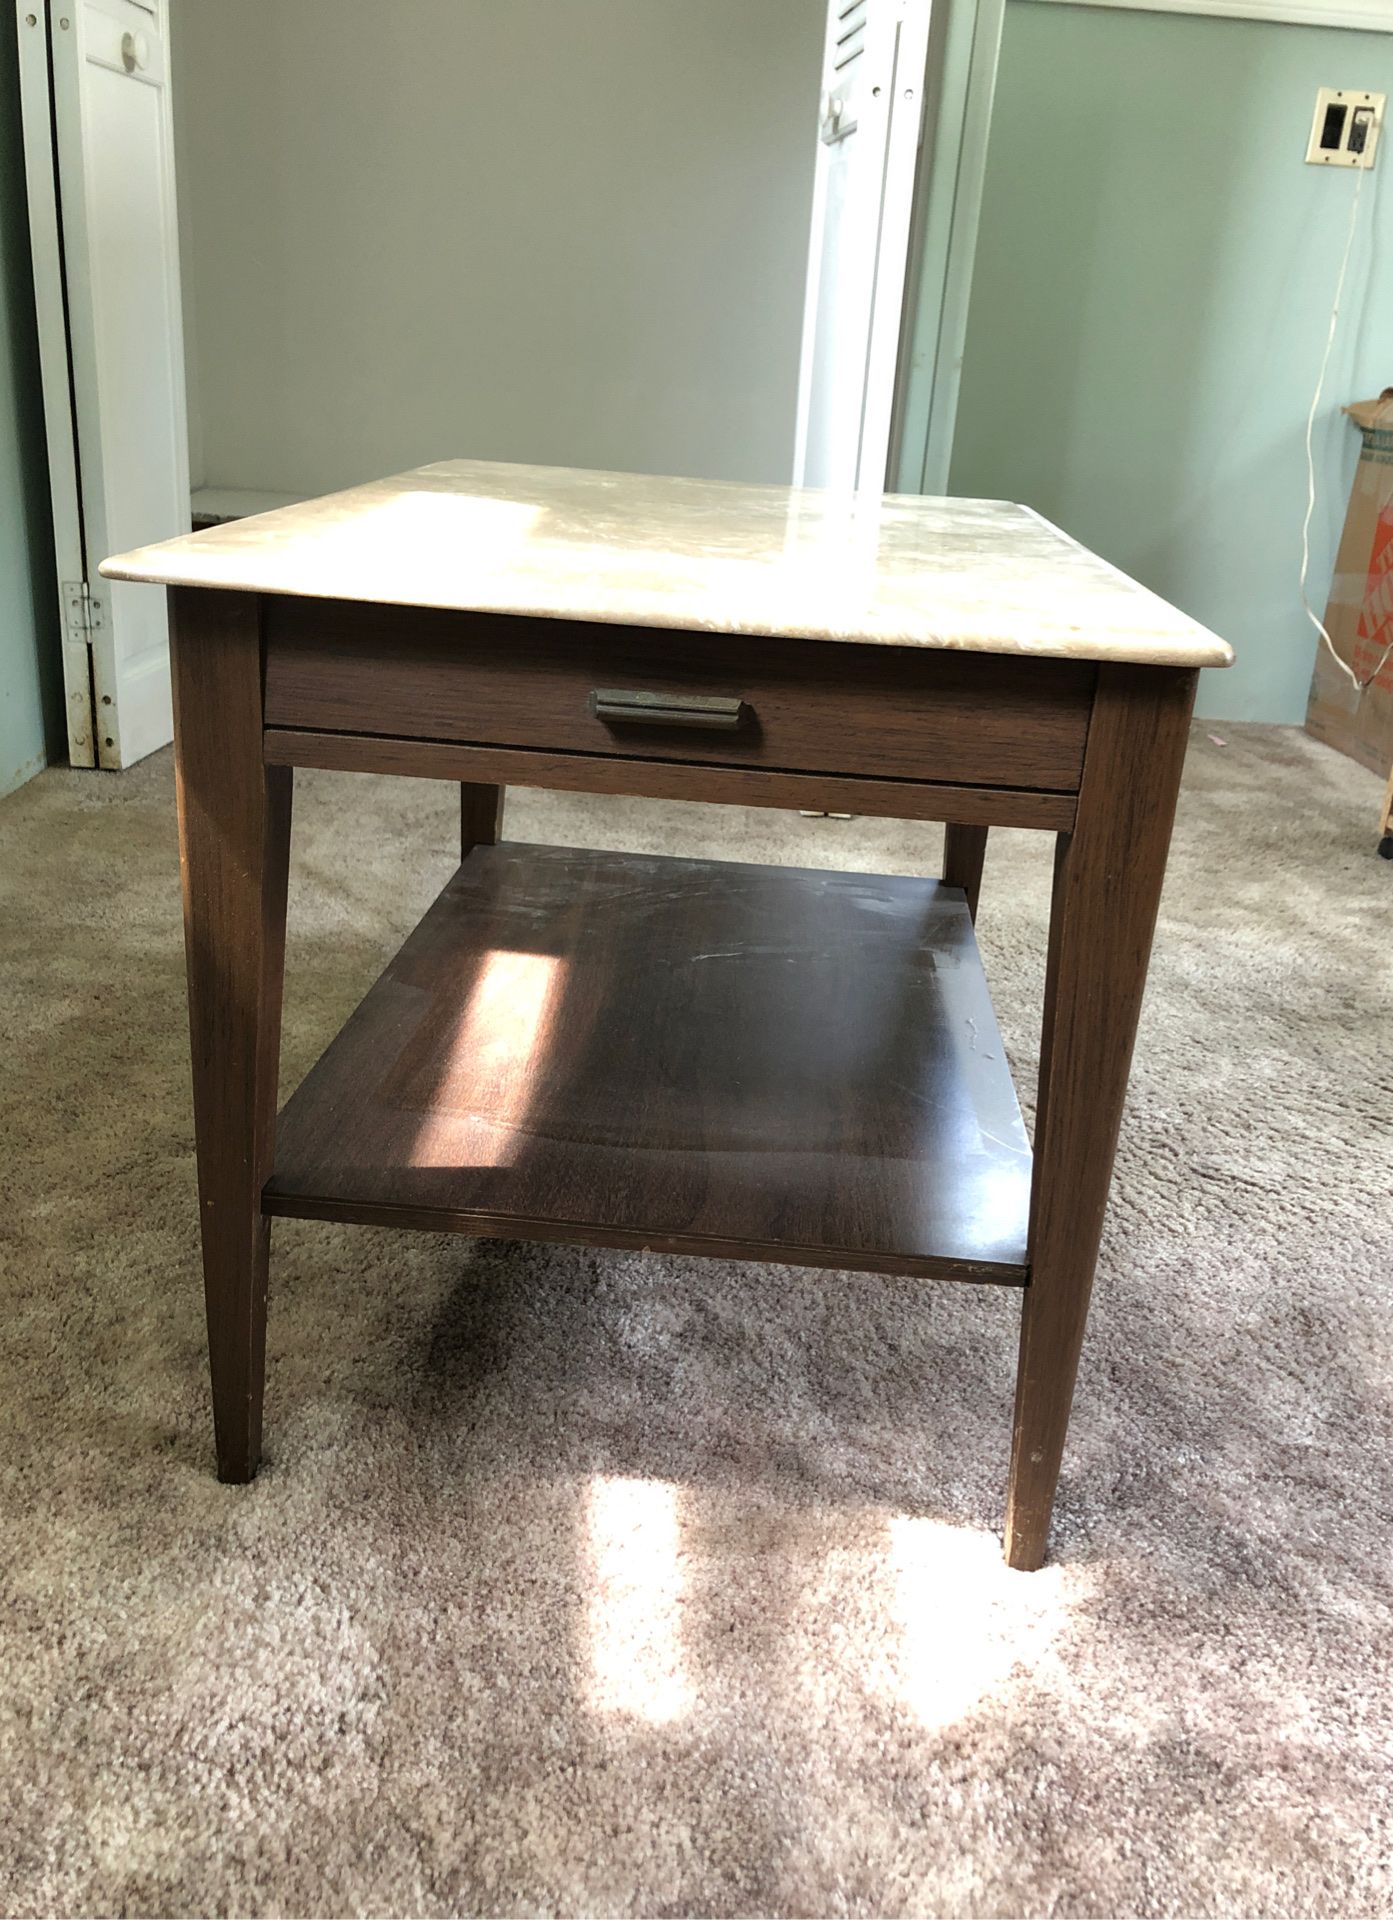 Tv stand or end table